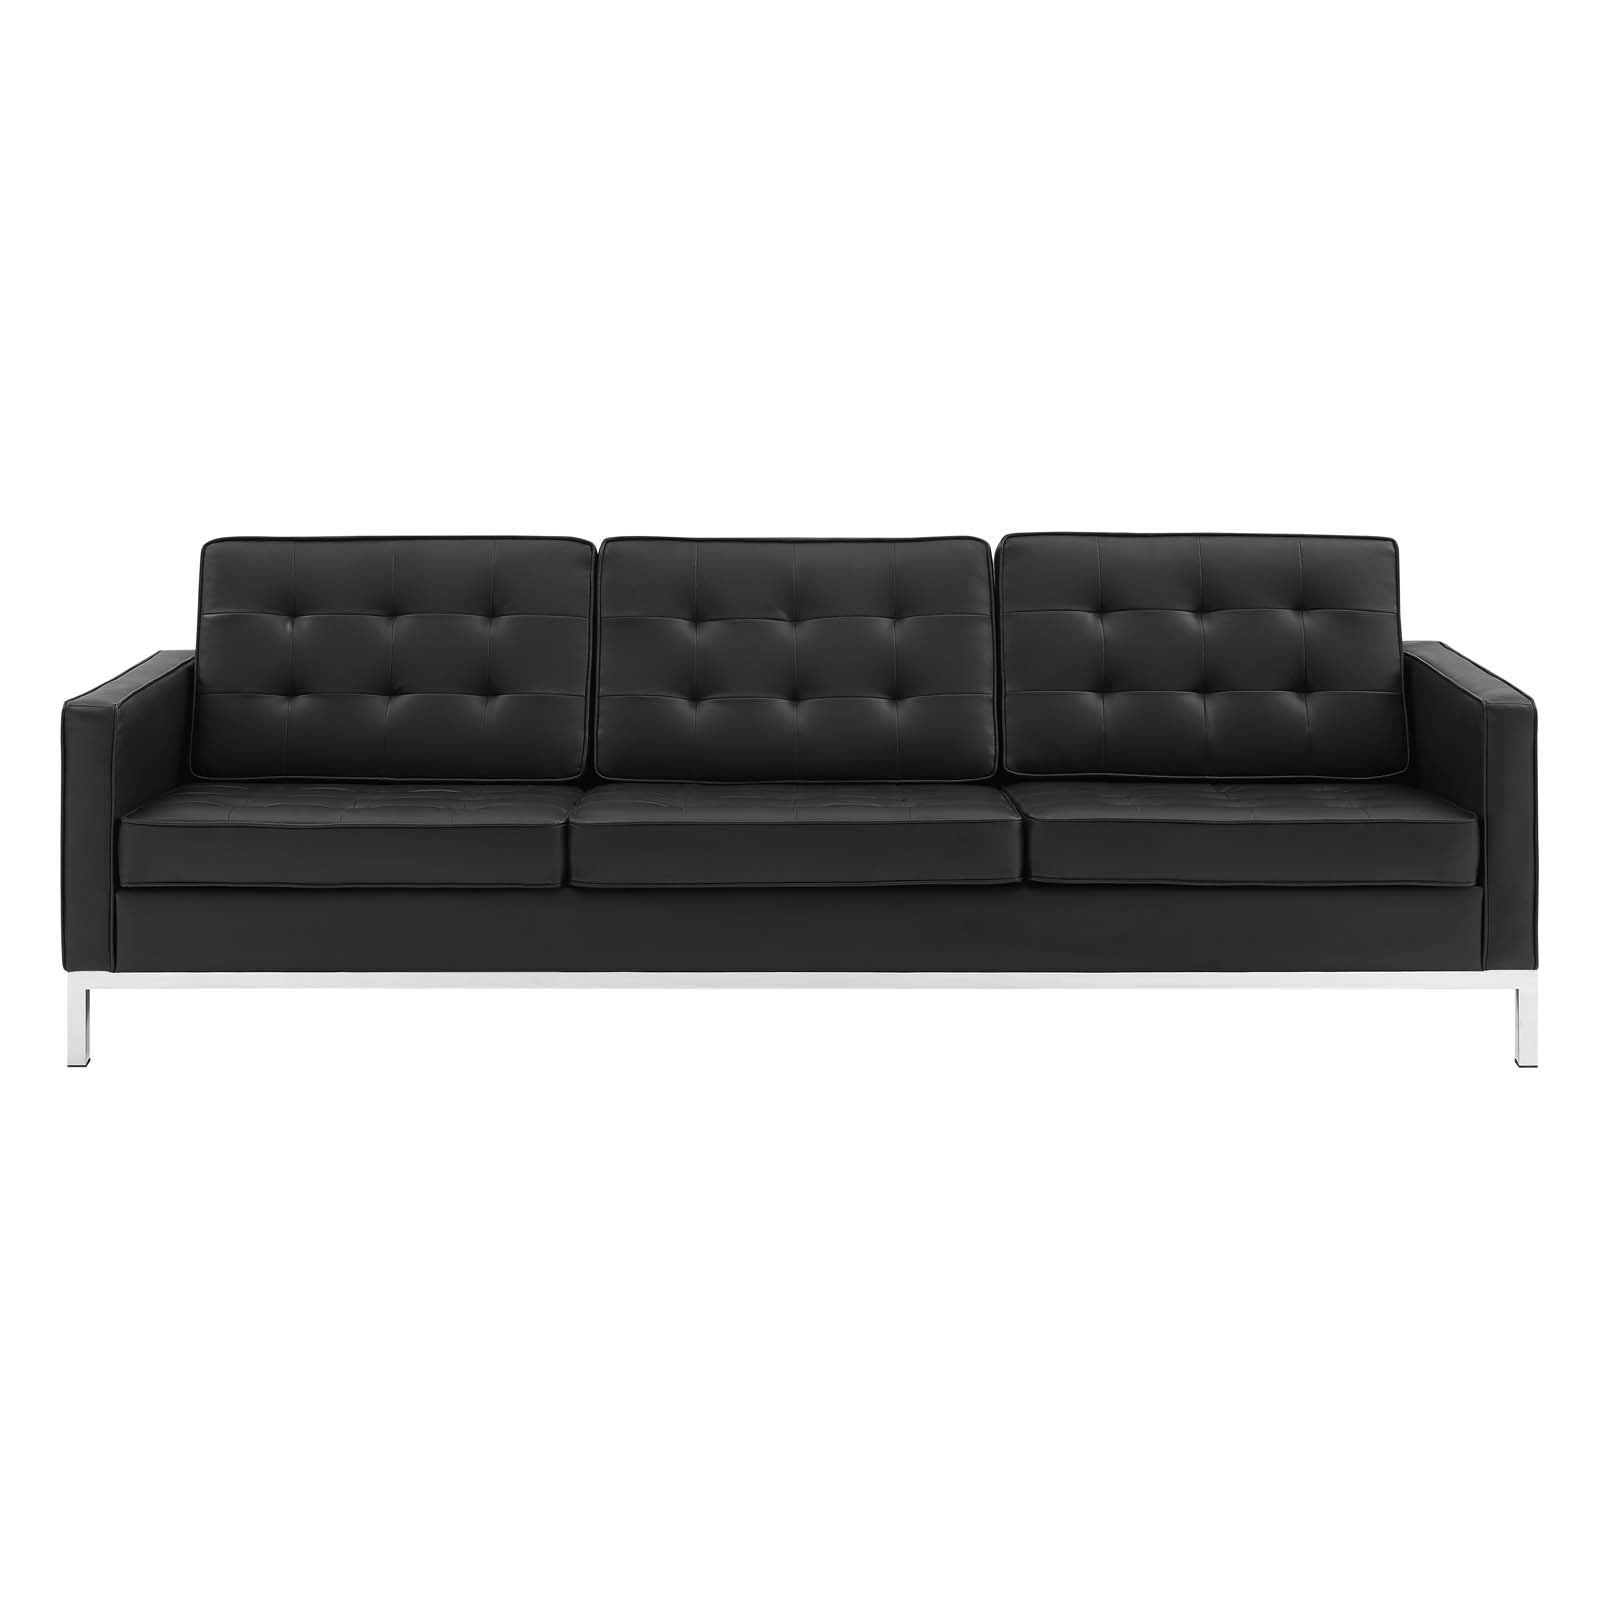 Loft Tufted Upholstered Faux Leather Sofa - East Shore Modern Home Furnishings